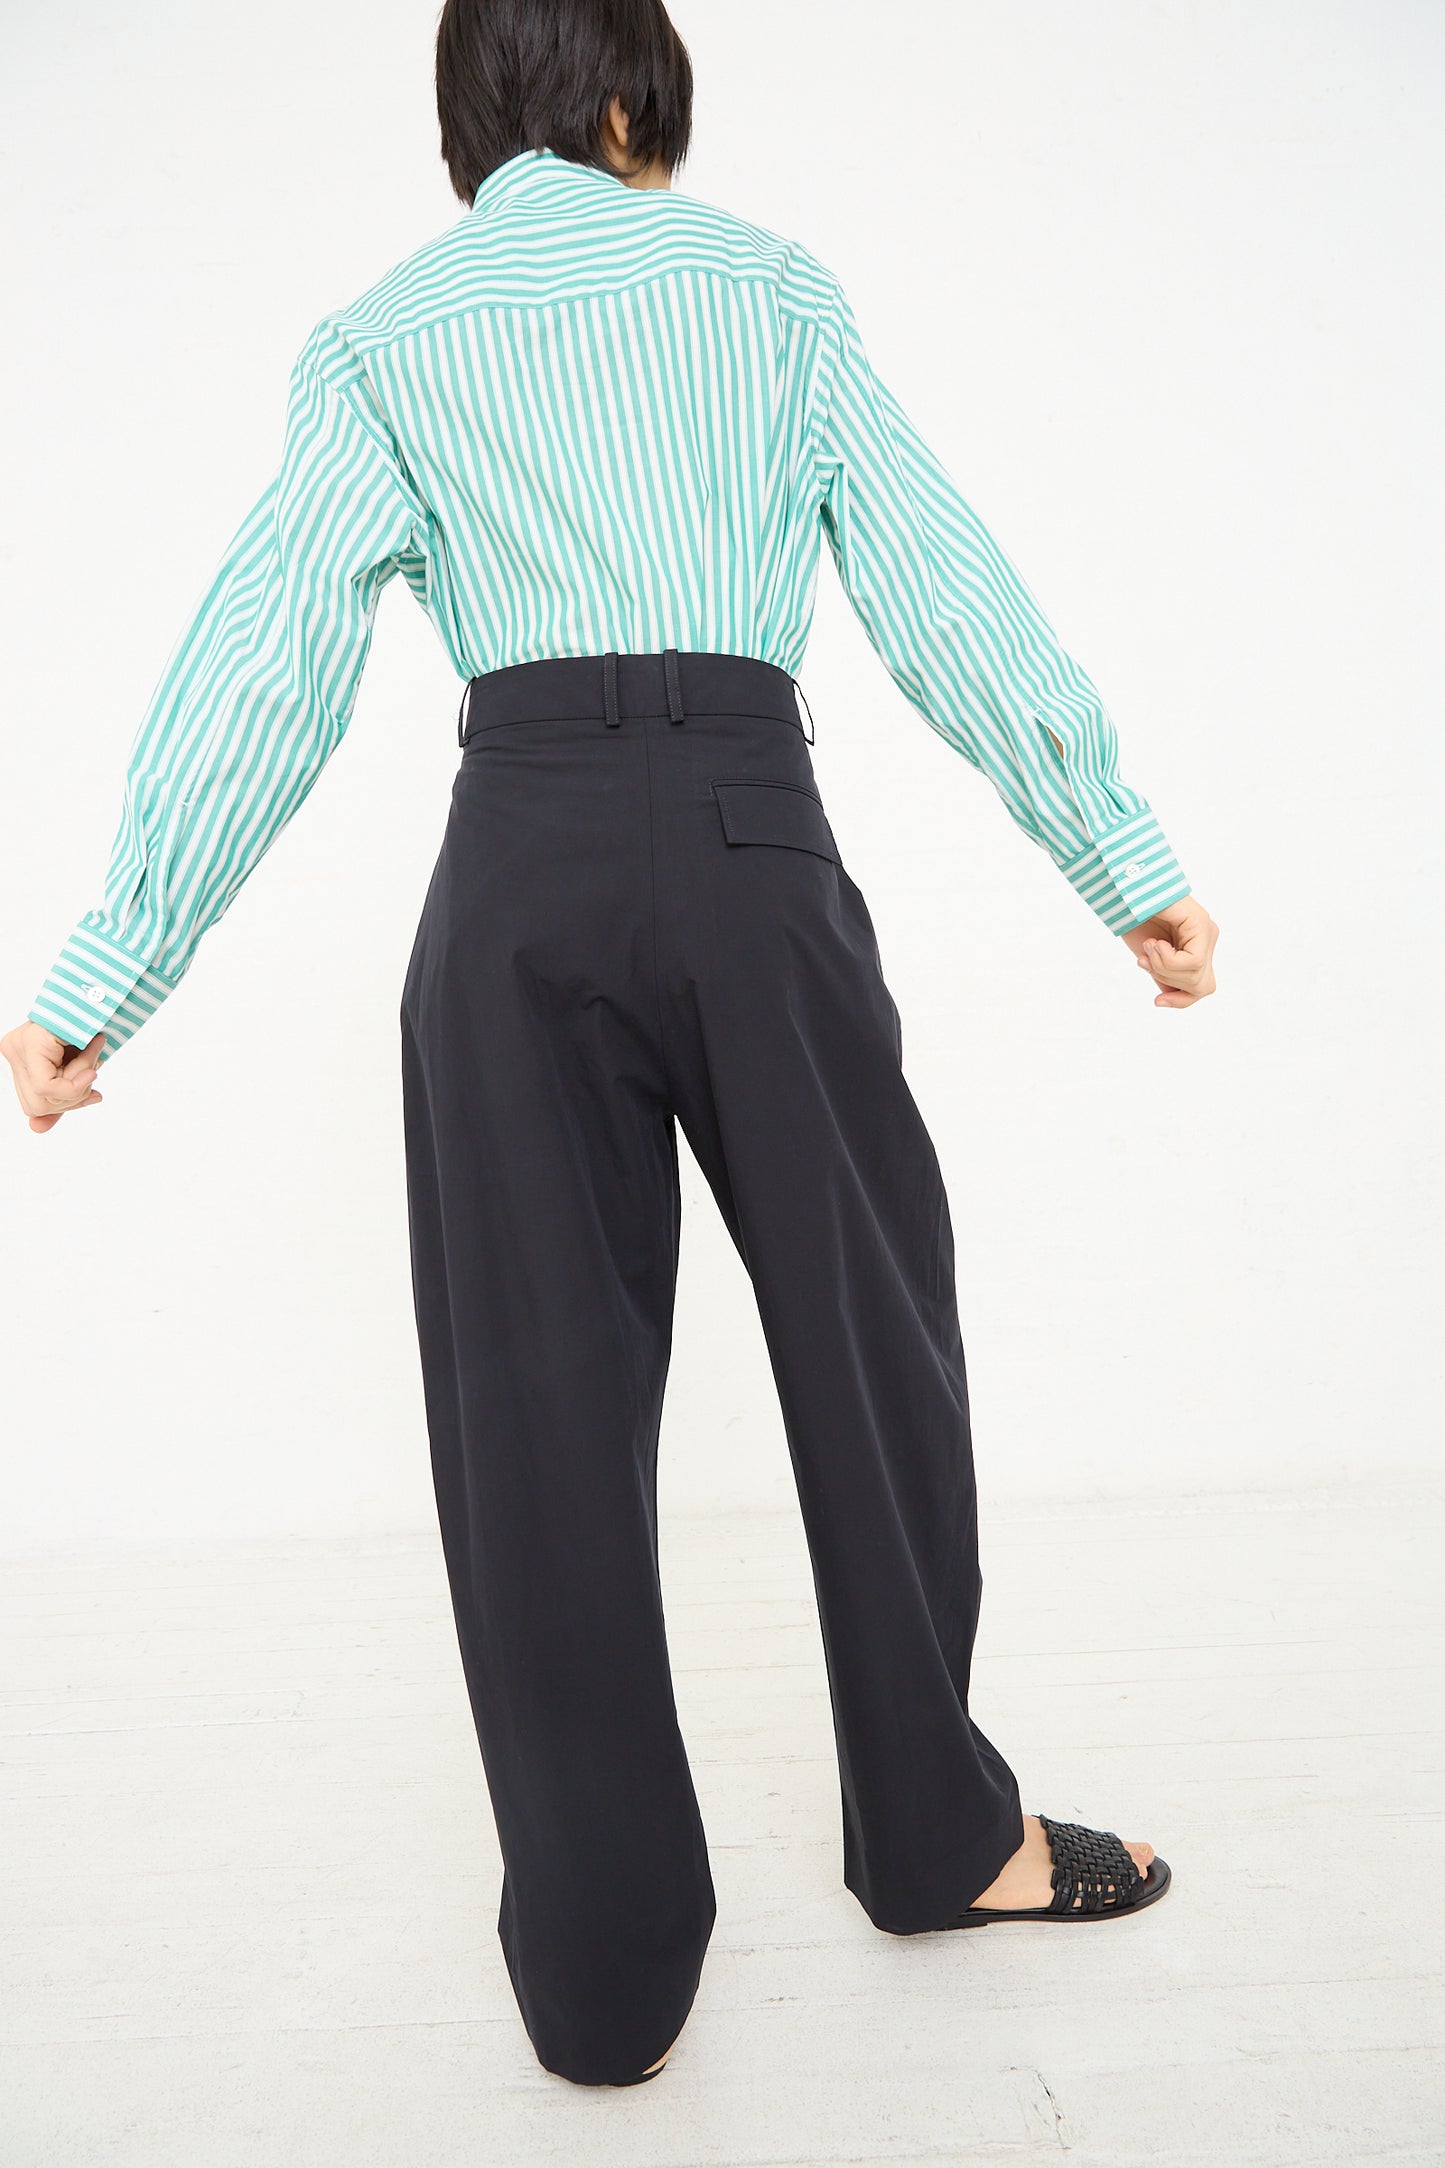 A person facing away from the camera wearing a green and white striped shirt tucked into Studio Nicholson's Acuna Double Pleat Front Pant in Darkest Navy, paired with black slip-on shoes.